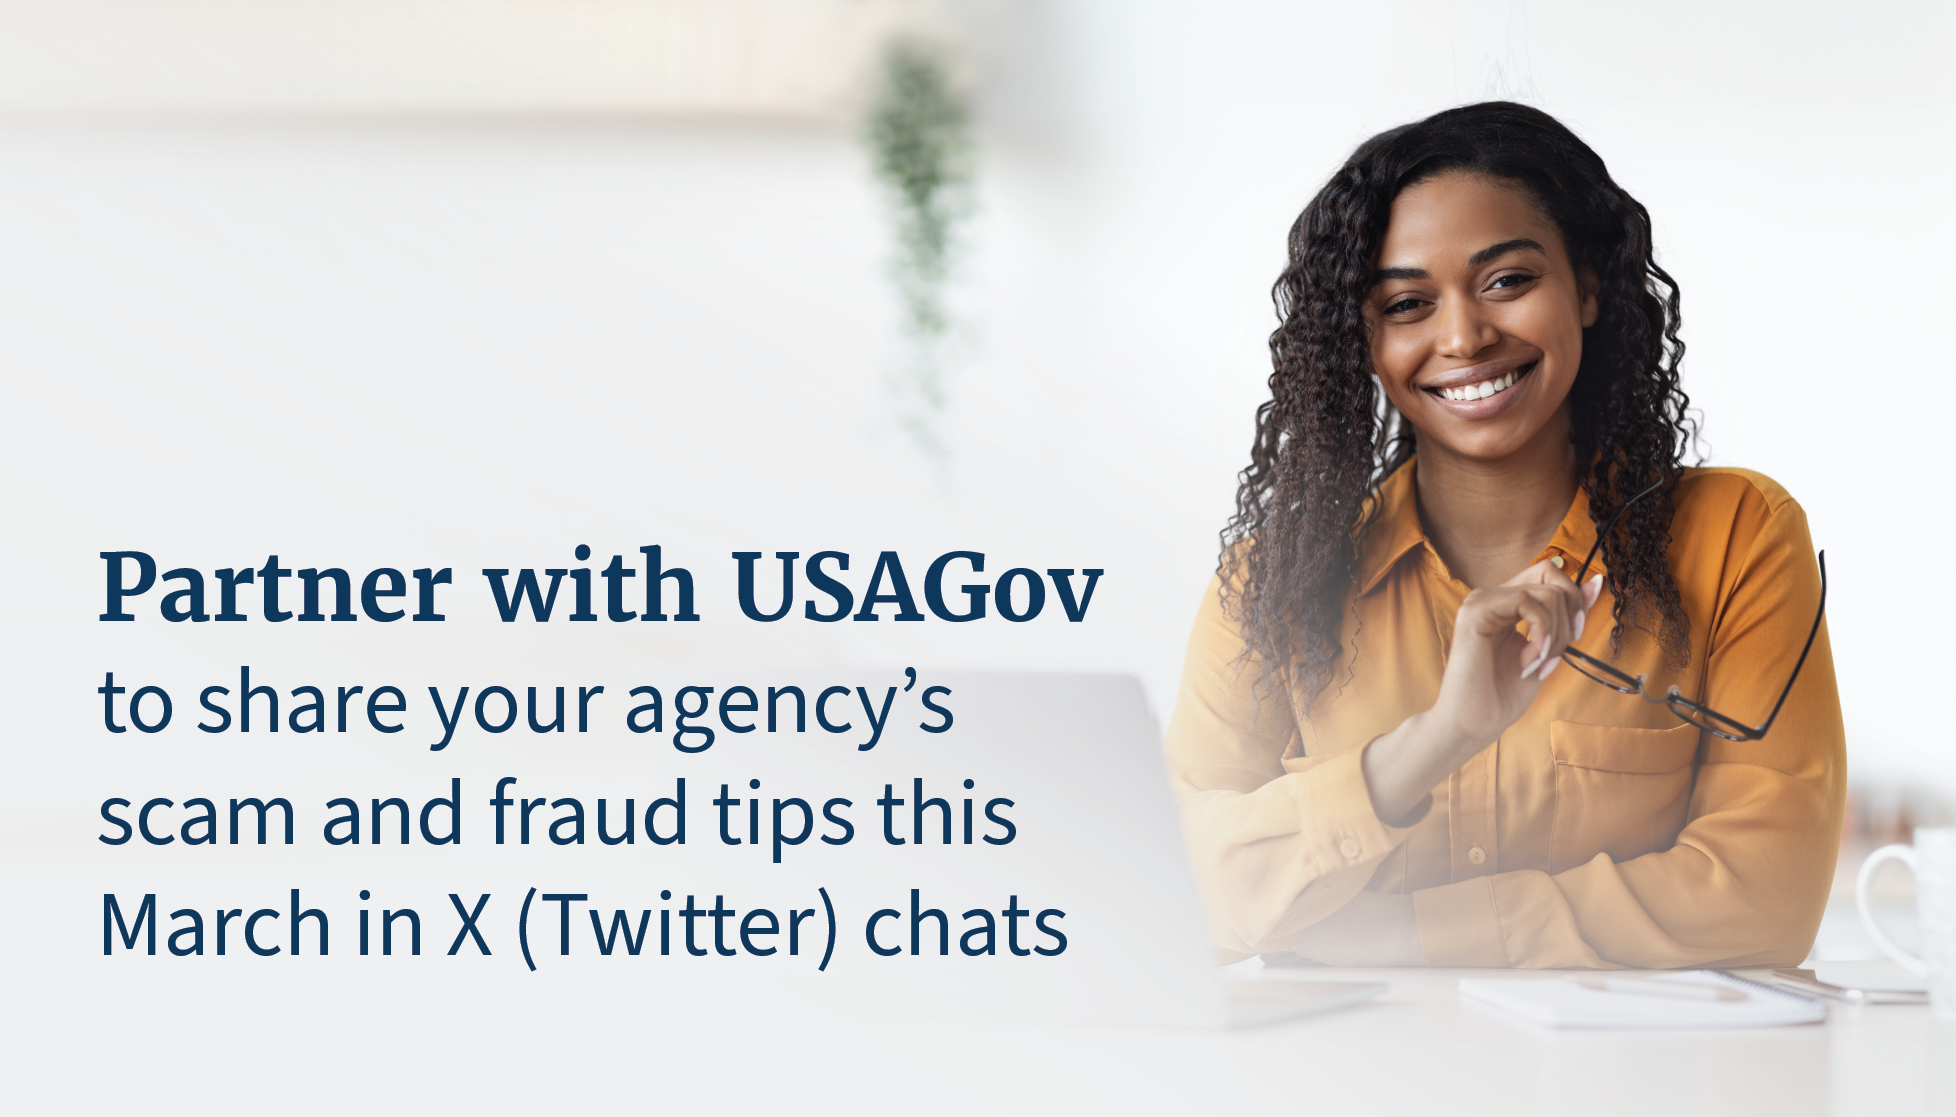 Partner with USAGov to share your agency’s scam and fraud tips this March in X (Twitter) chats